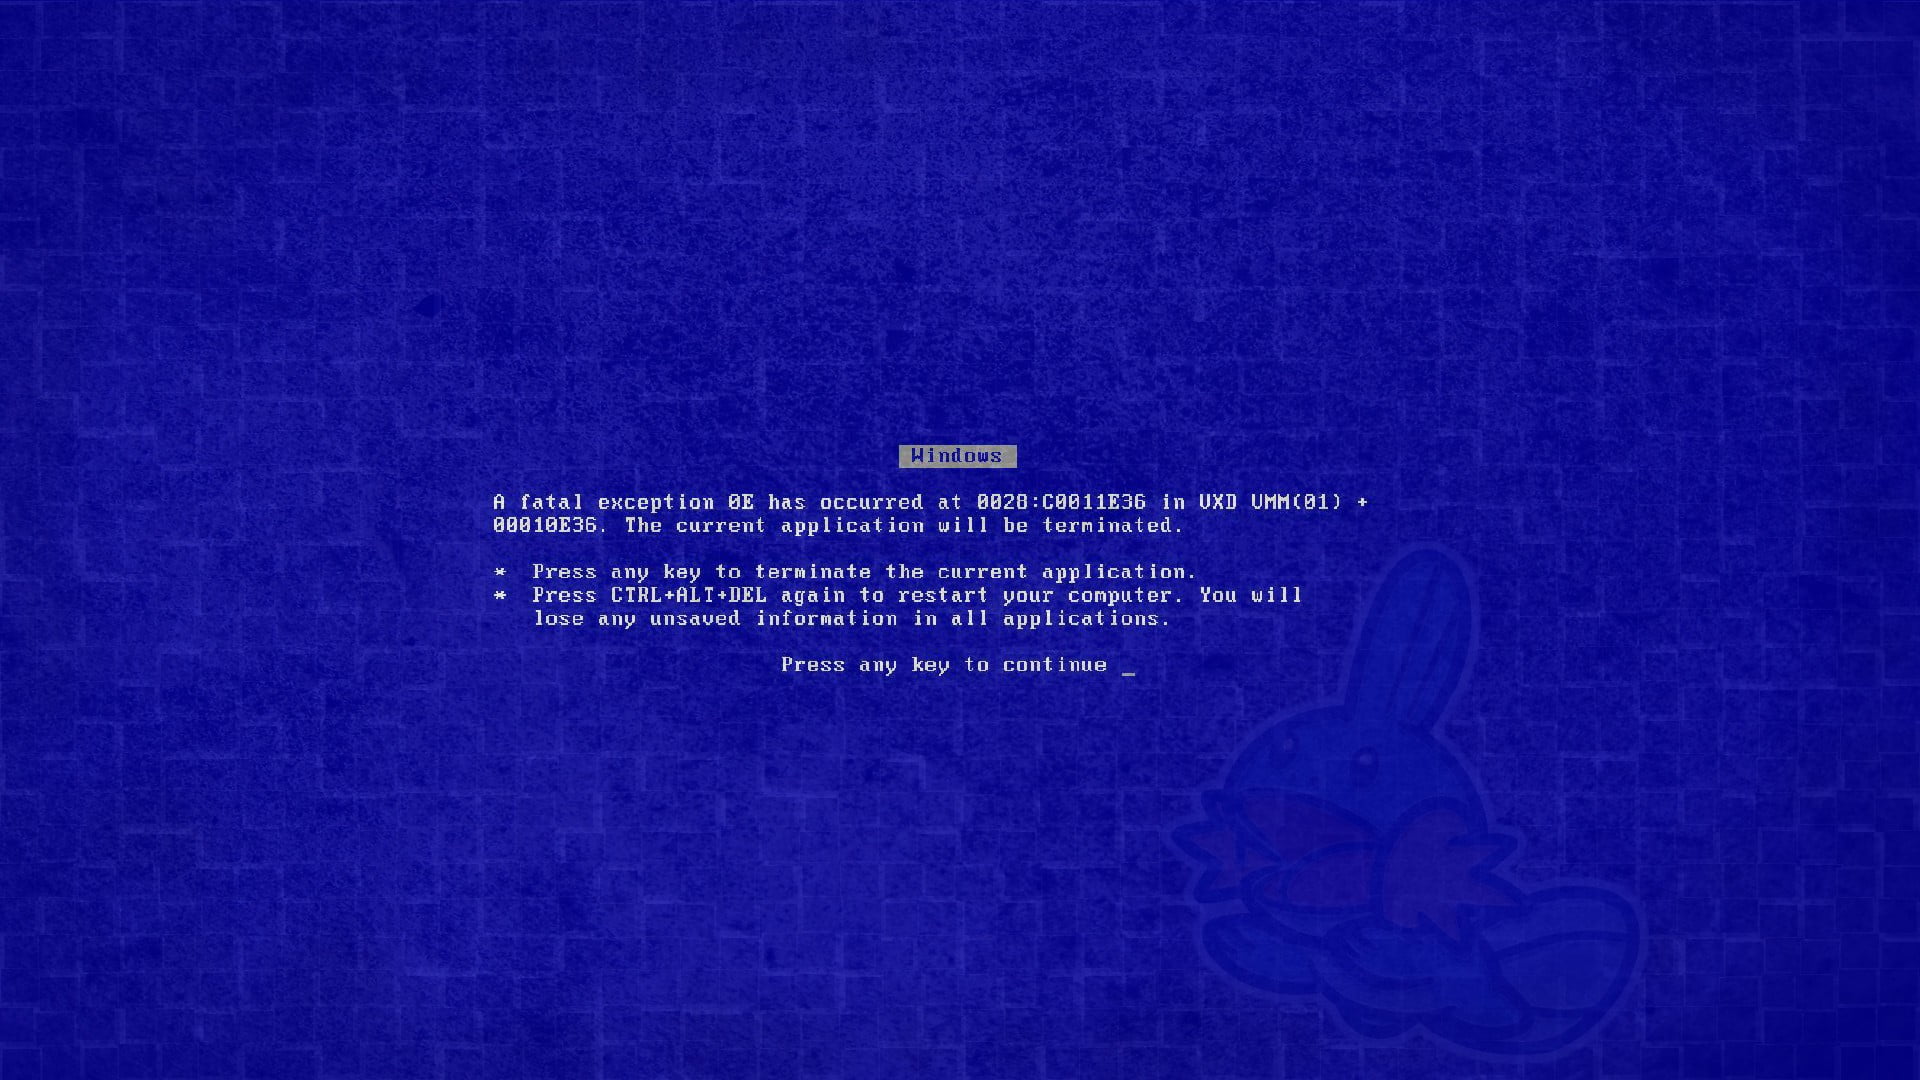 Blue Screen of Death, text, watermarked